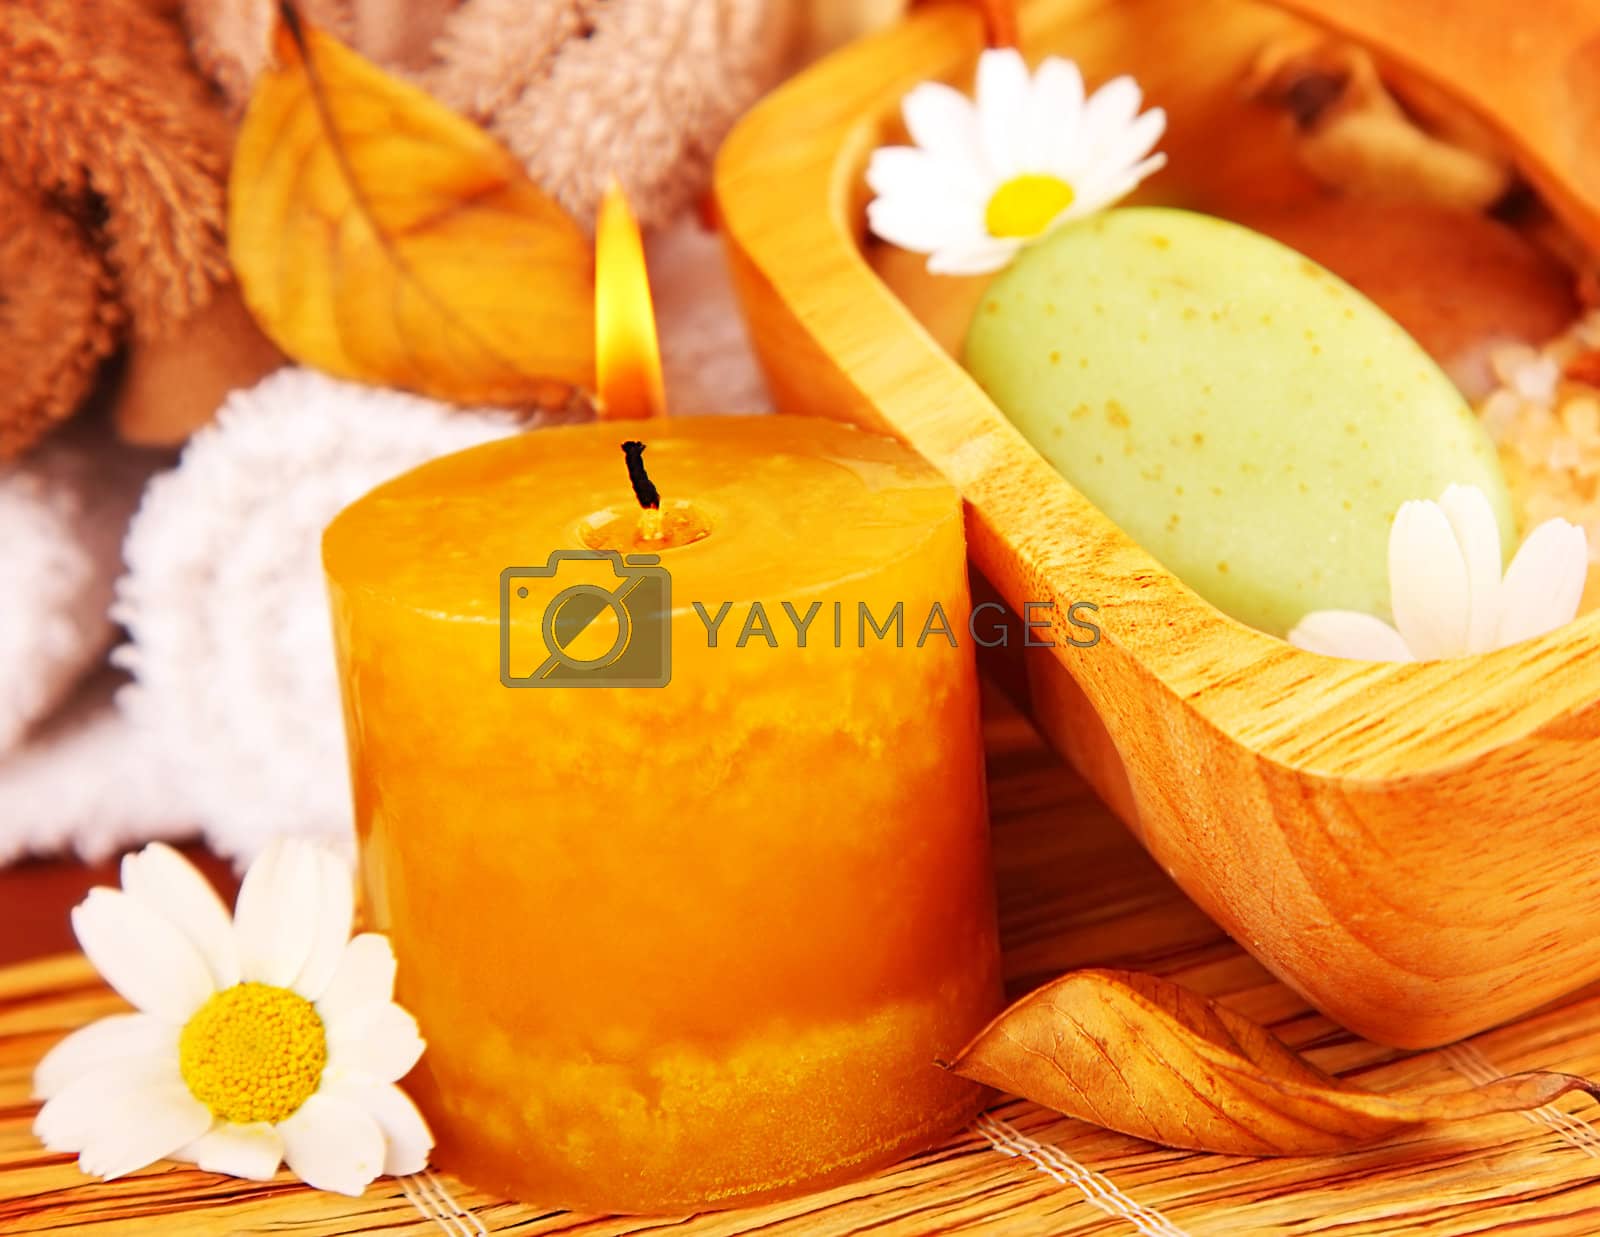 Royalty free image of Spa candle by Anna_Omelchenko